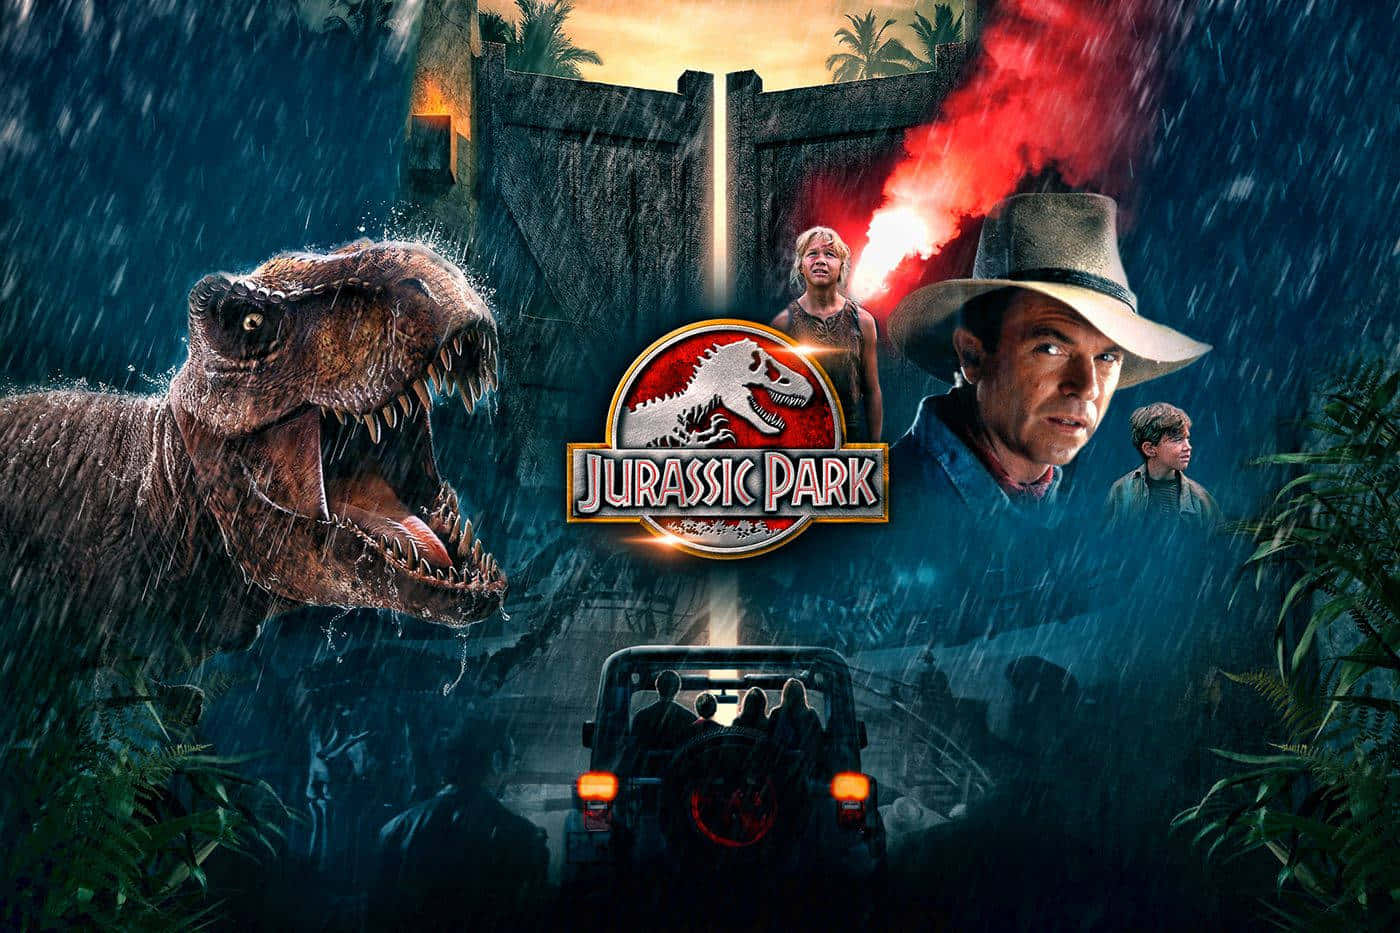 Dinosaurs abound in the world of Jurassic Park